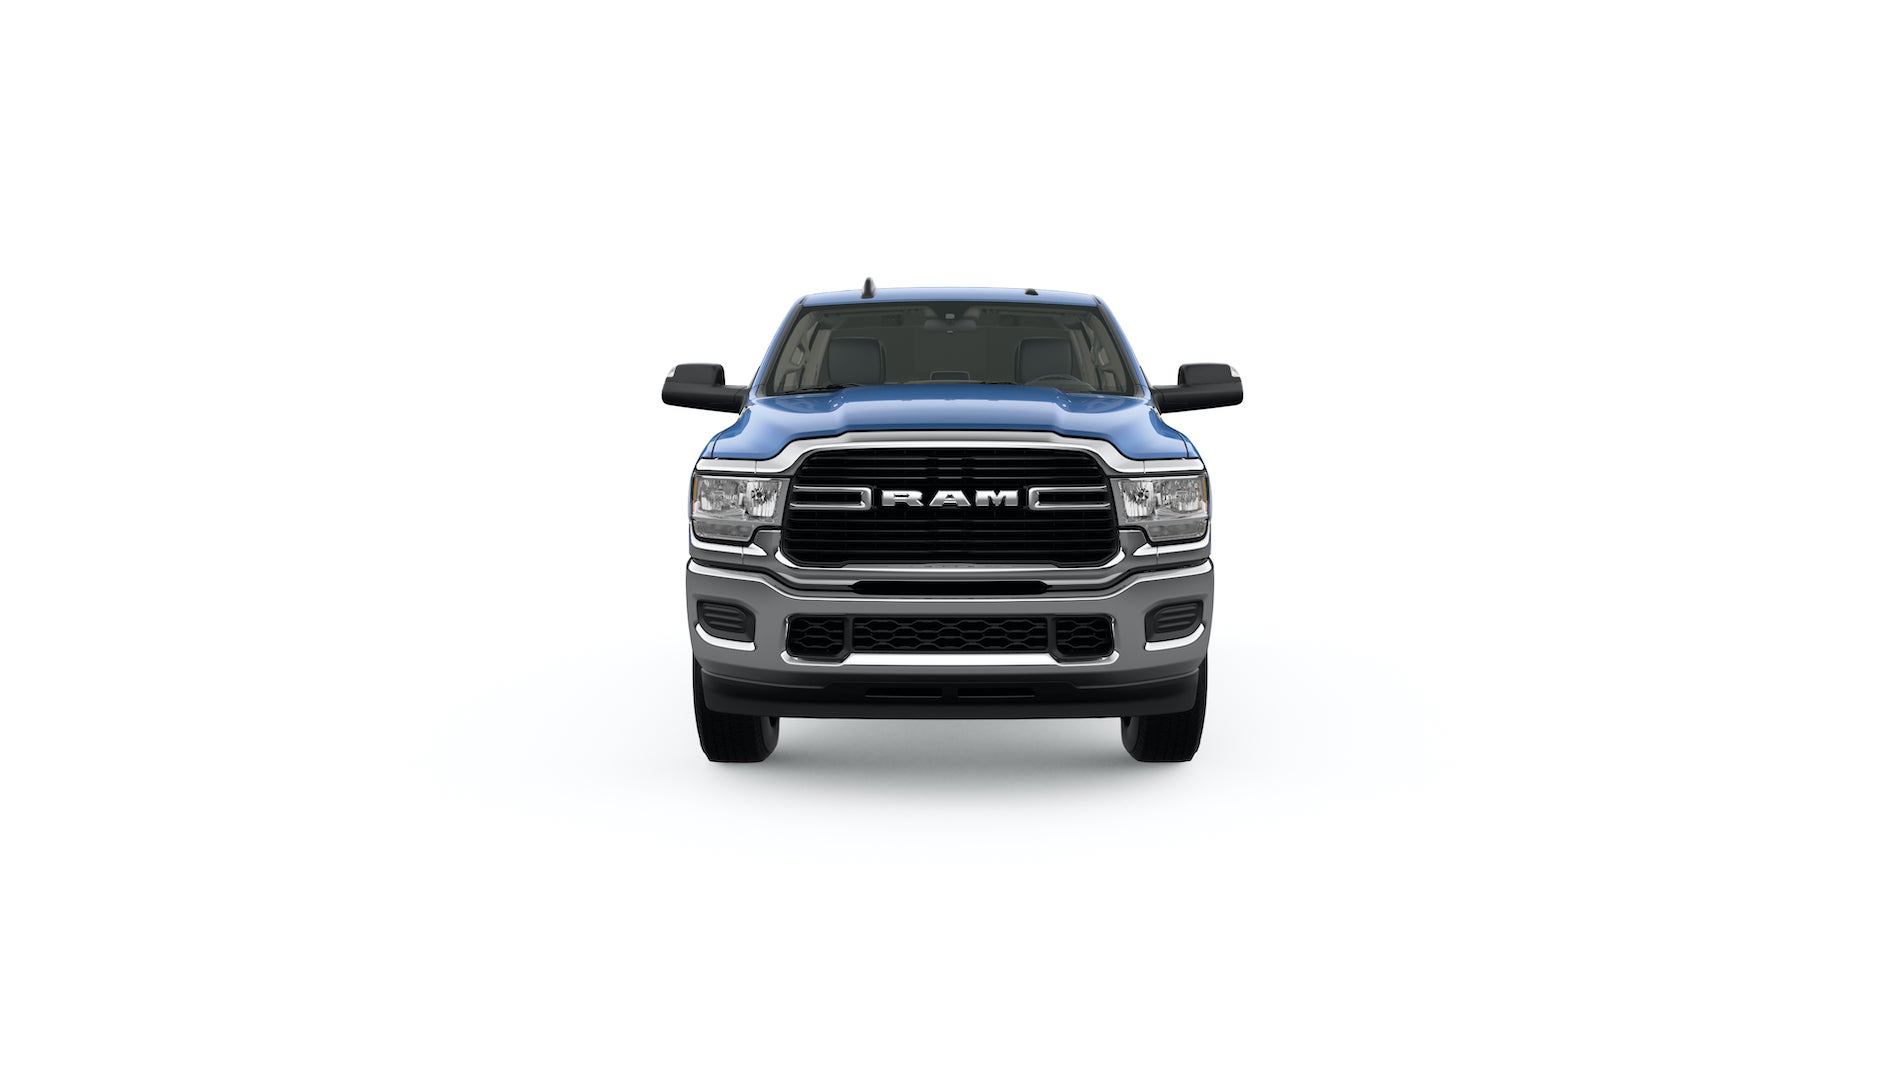 Ram 3500 Towing Capacity Support